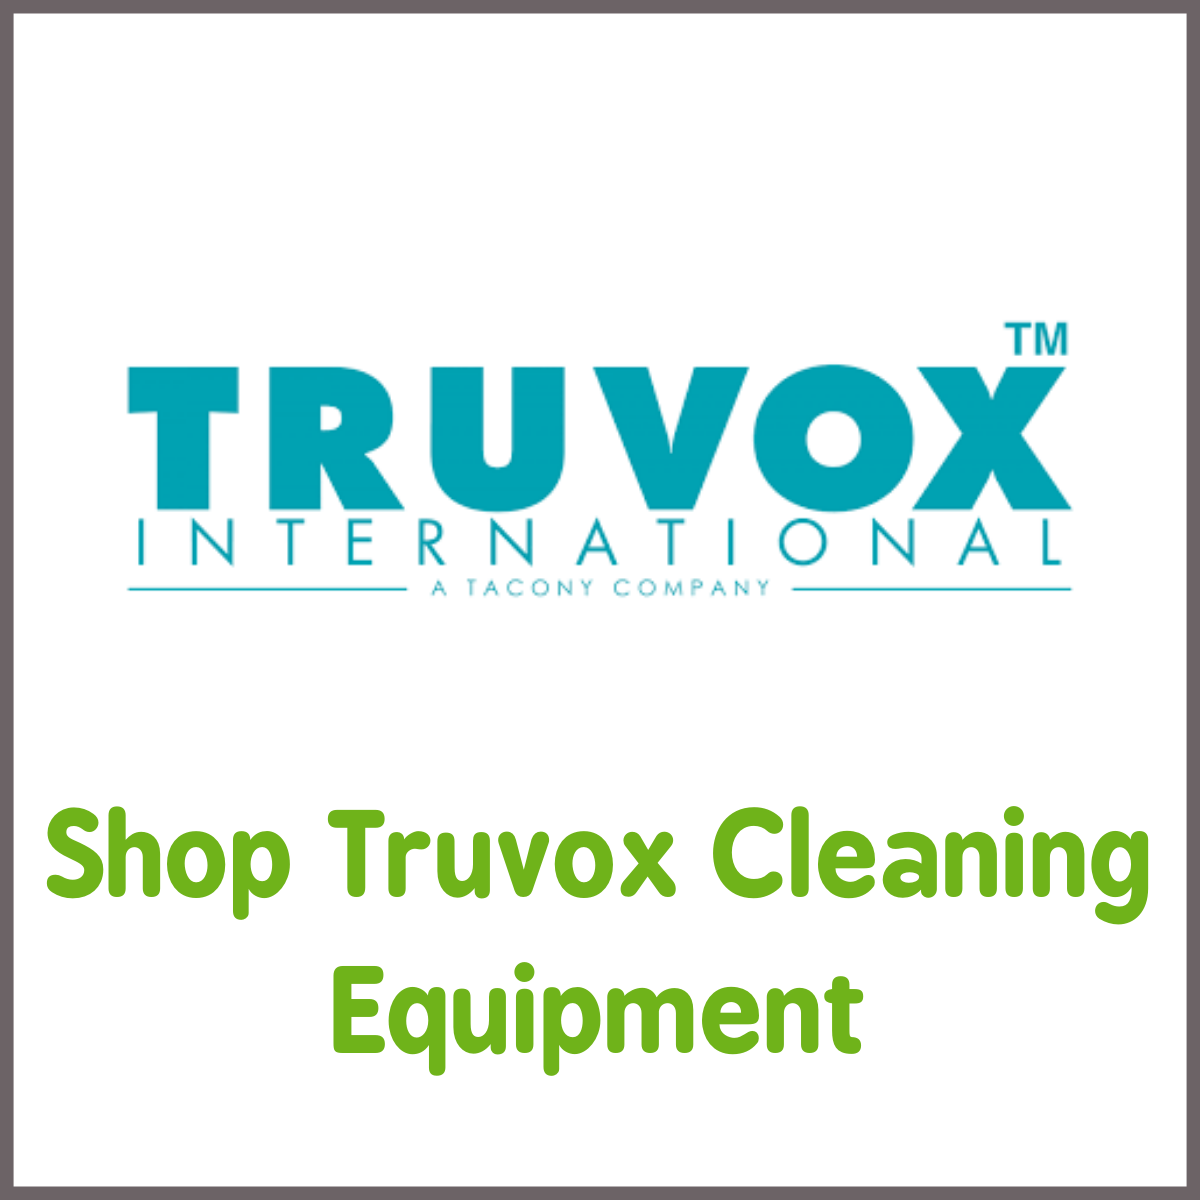 Clenli Direct - Shop All Truvox Cleaning Equipment